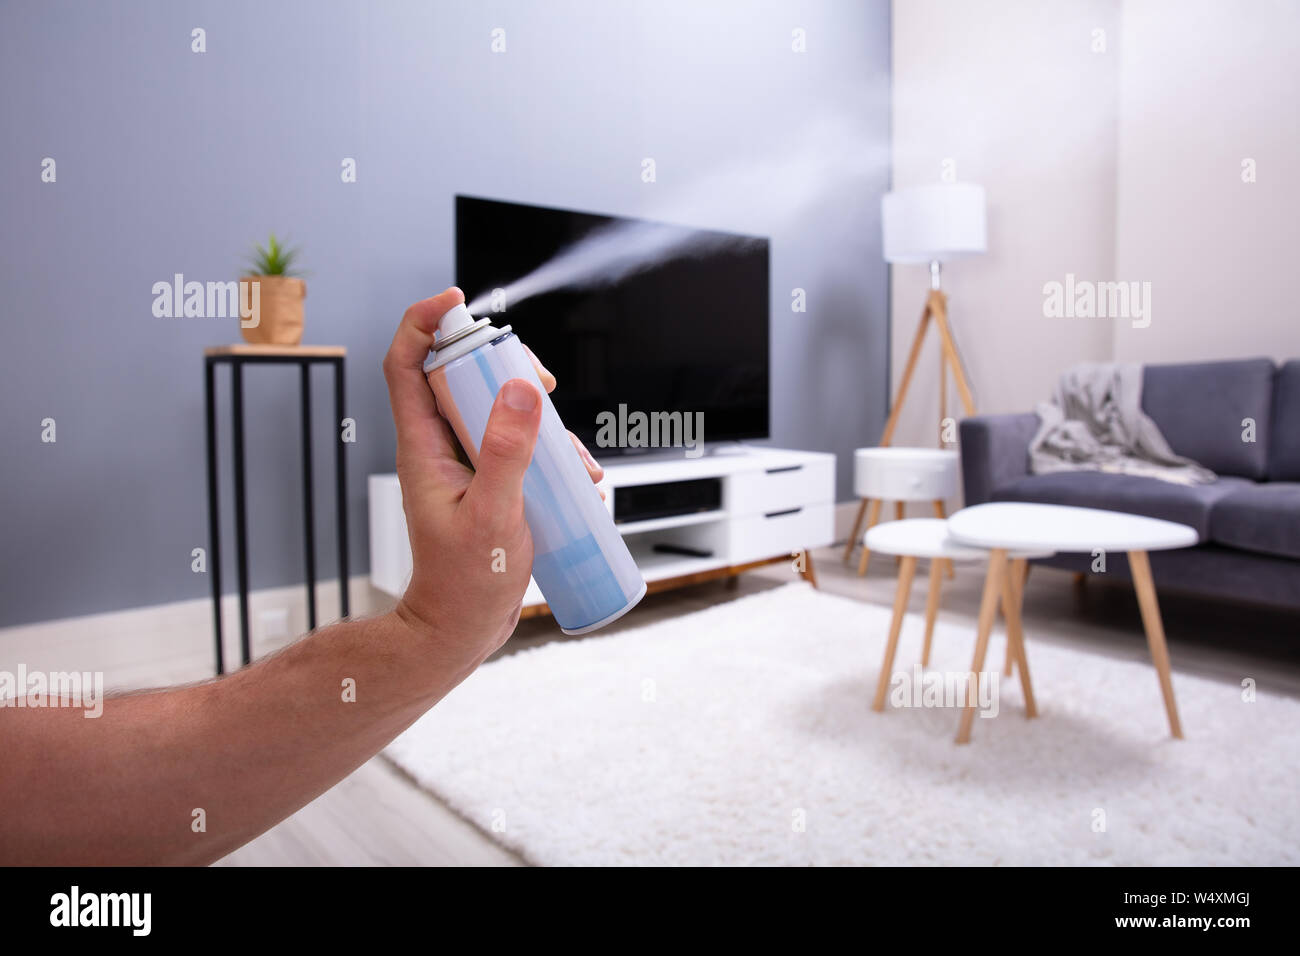 Close-up Of A Person's Hand Spraying Air Freshener In Living Room Stock Photo